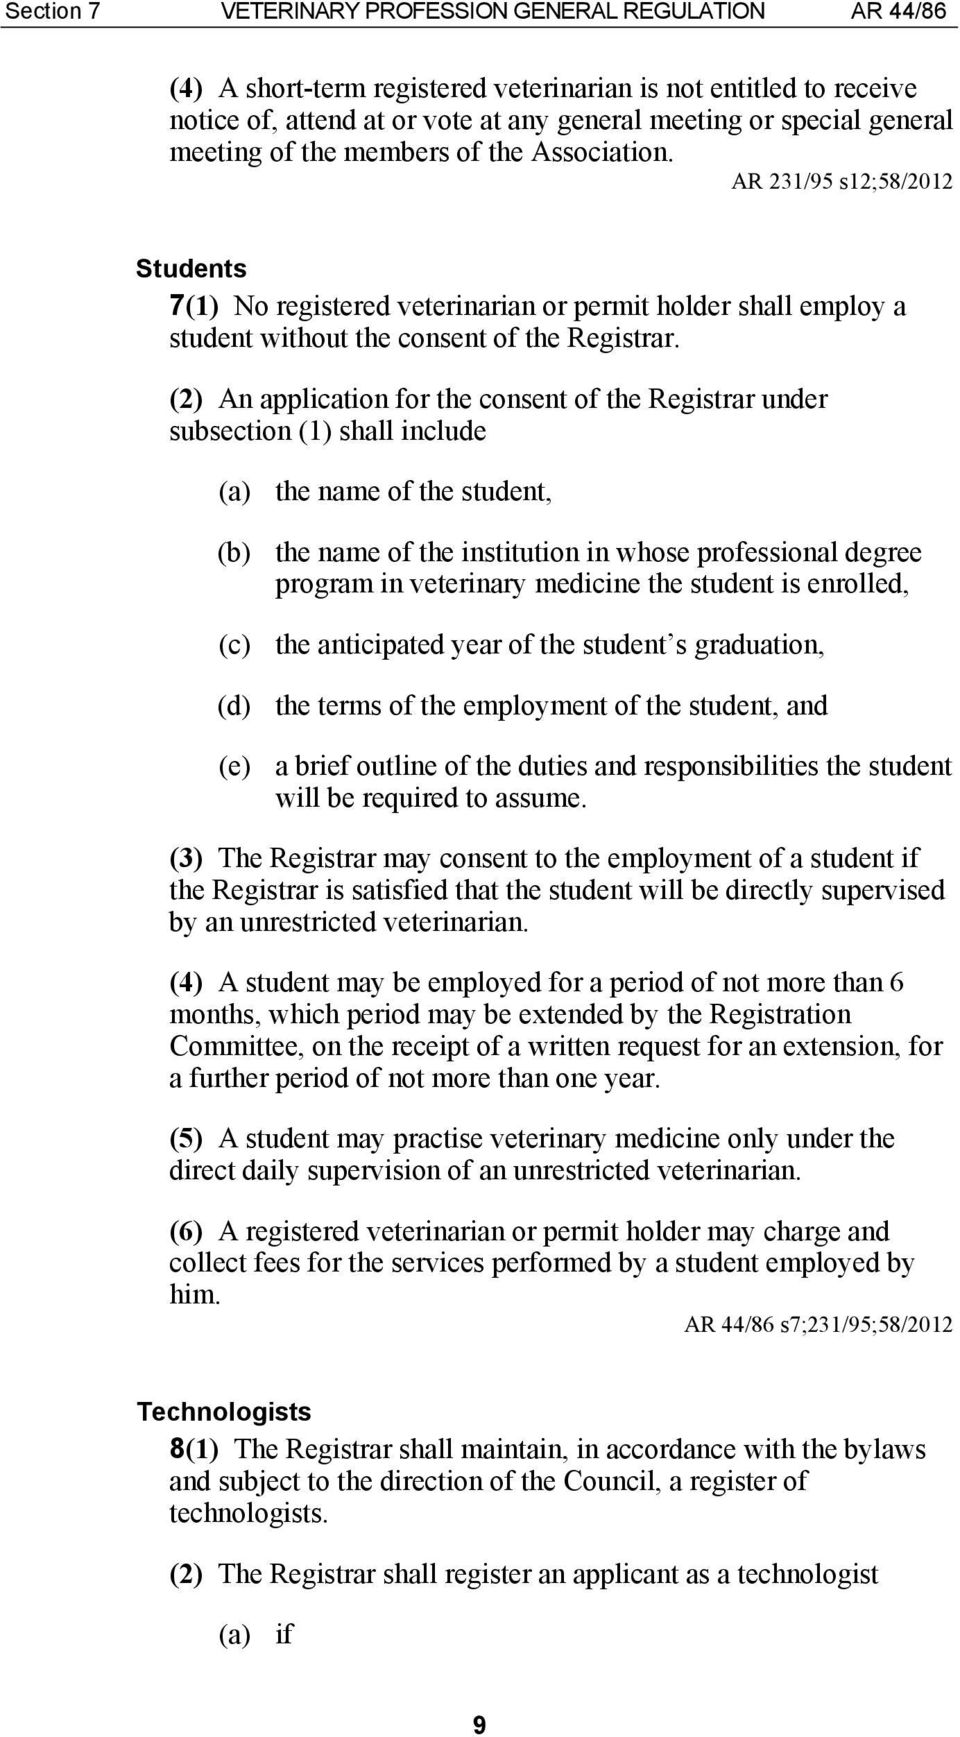 (2) An application for the consent of the Registrar under subsection (1) shall include (a) the name of the student, (b) the name of the institution in whose professional degree program in veterinary